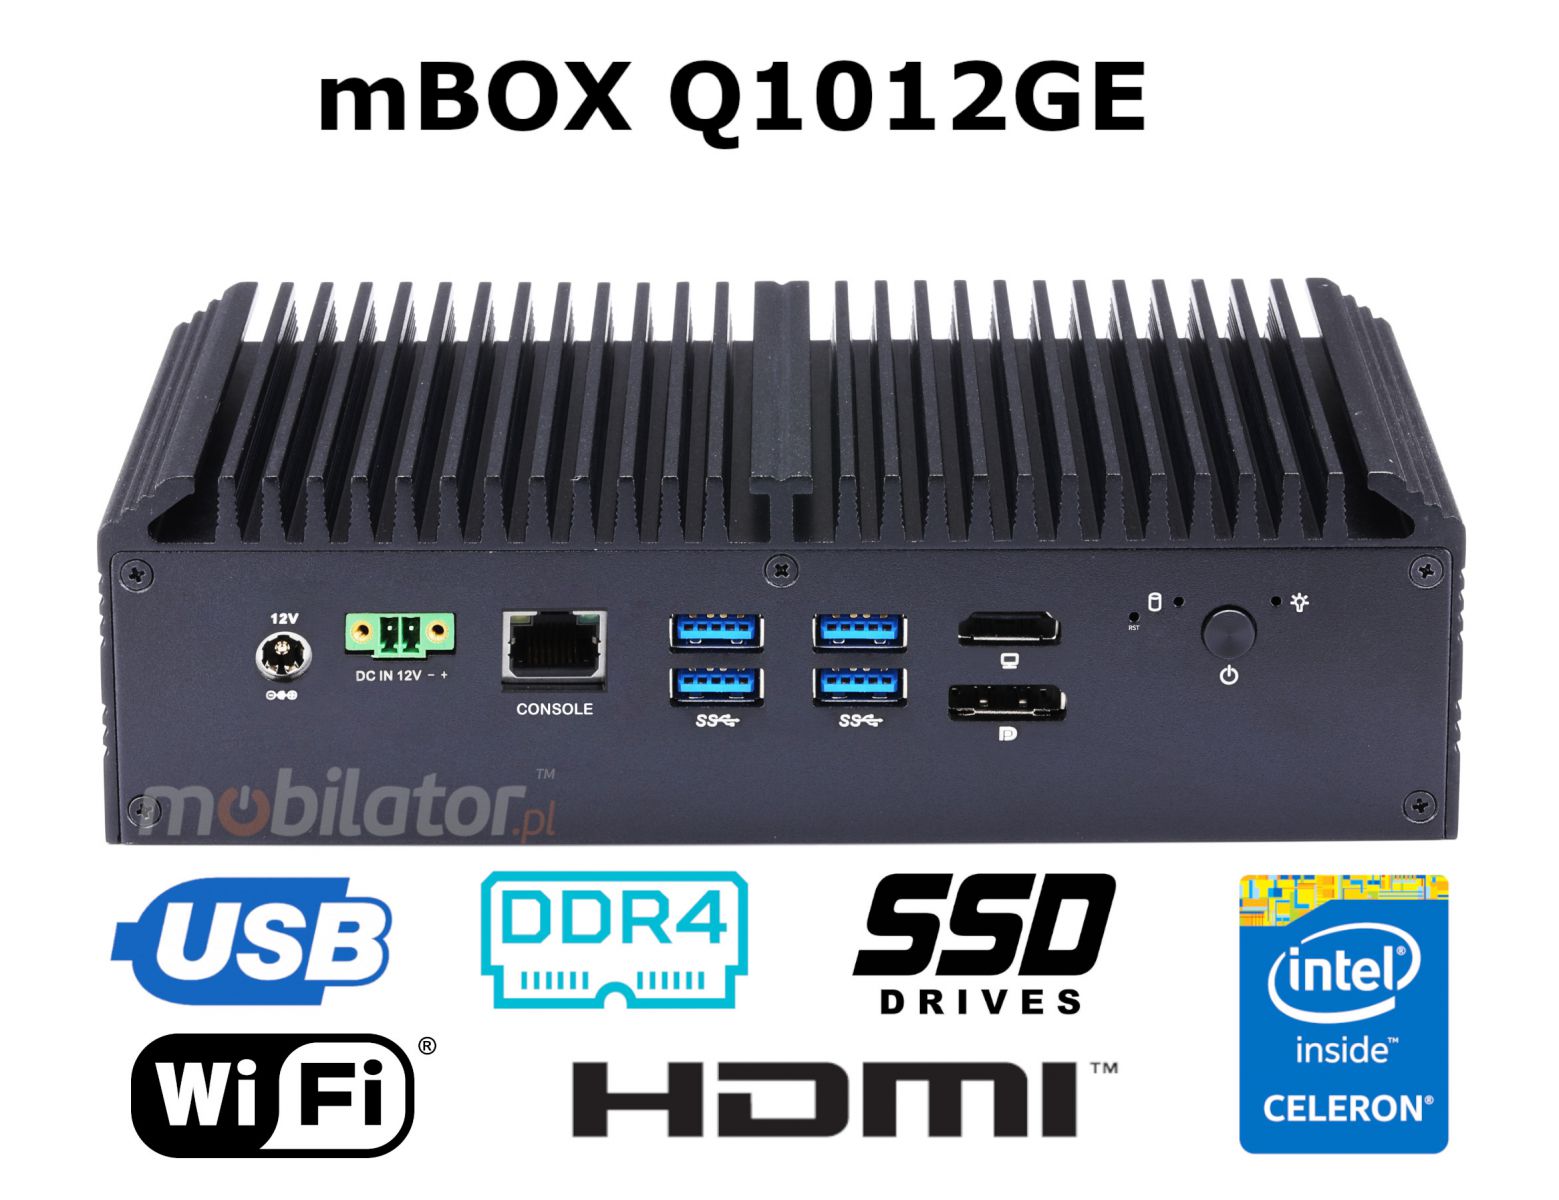 mBOX Q1012GE with 16GB RAM and 512GB SSD